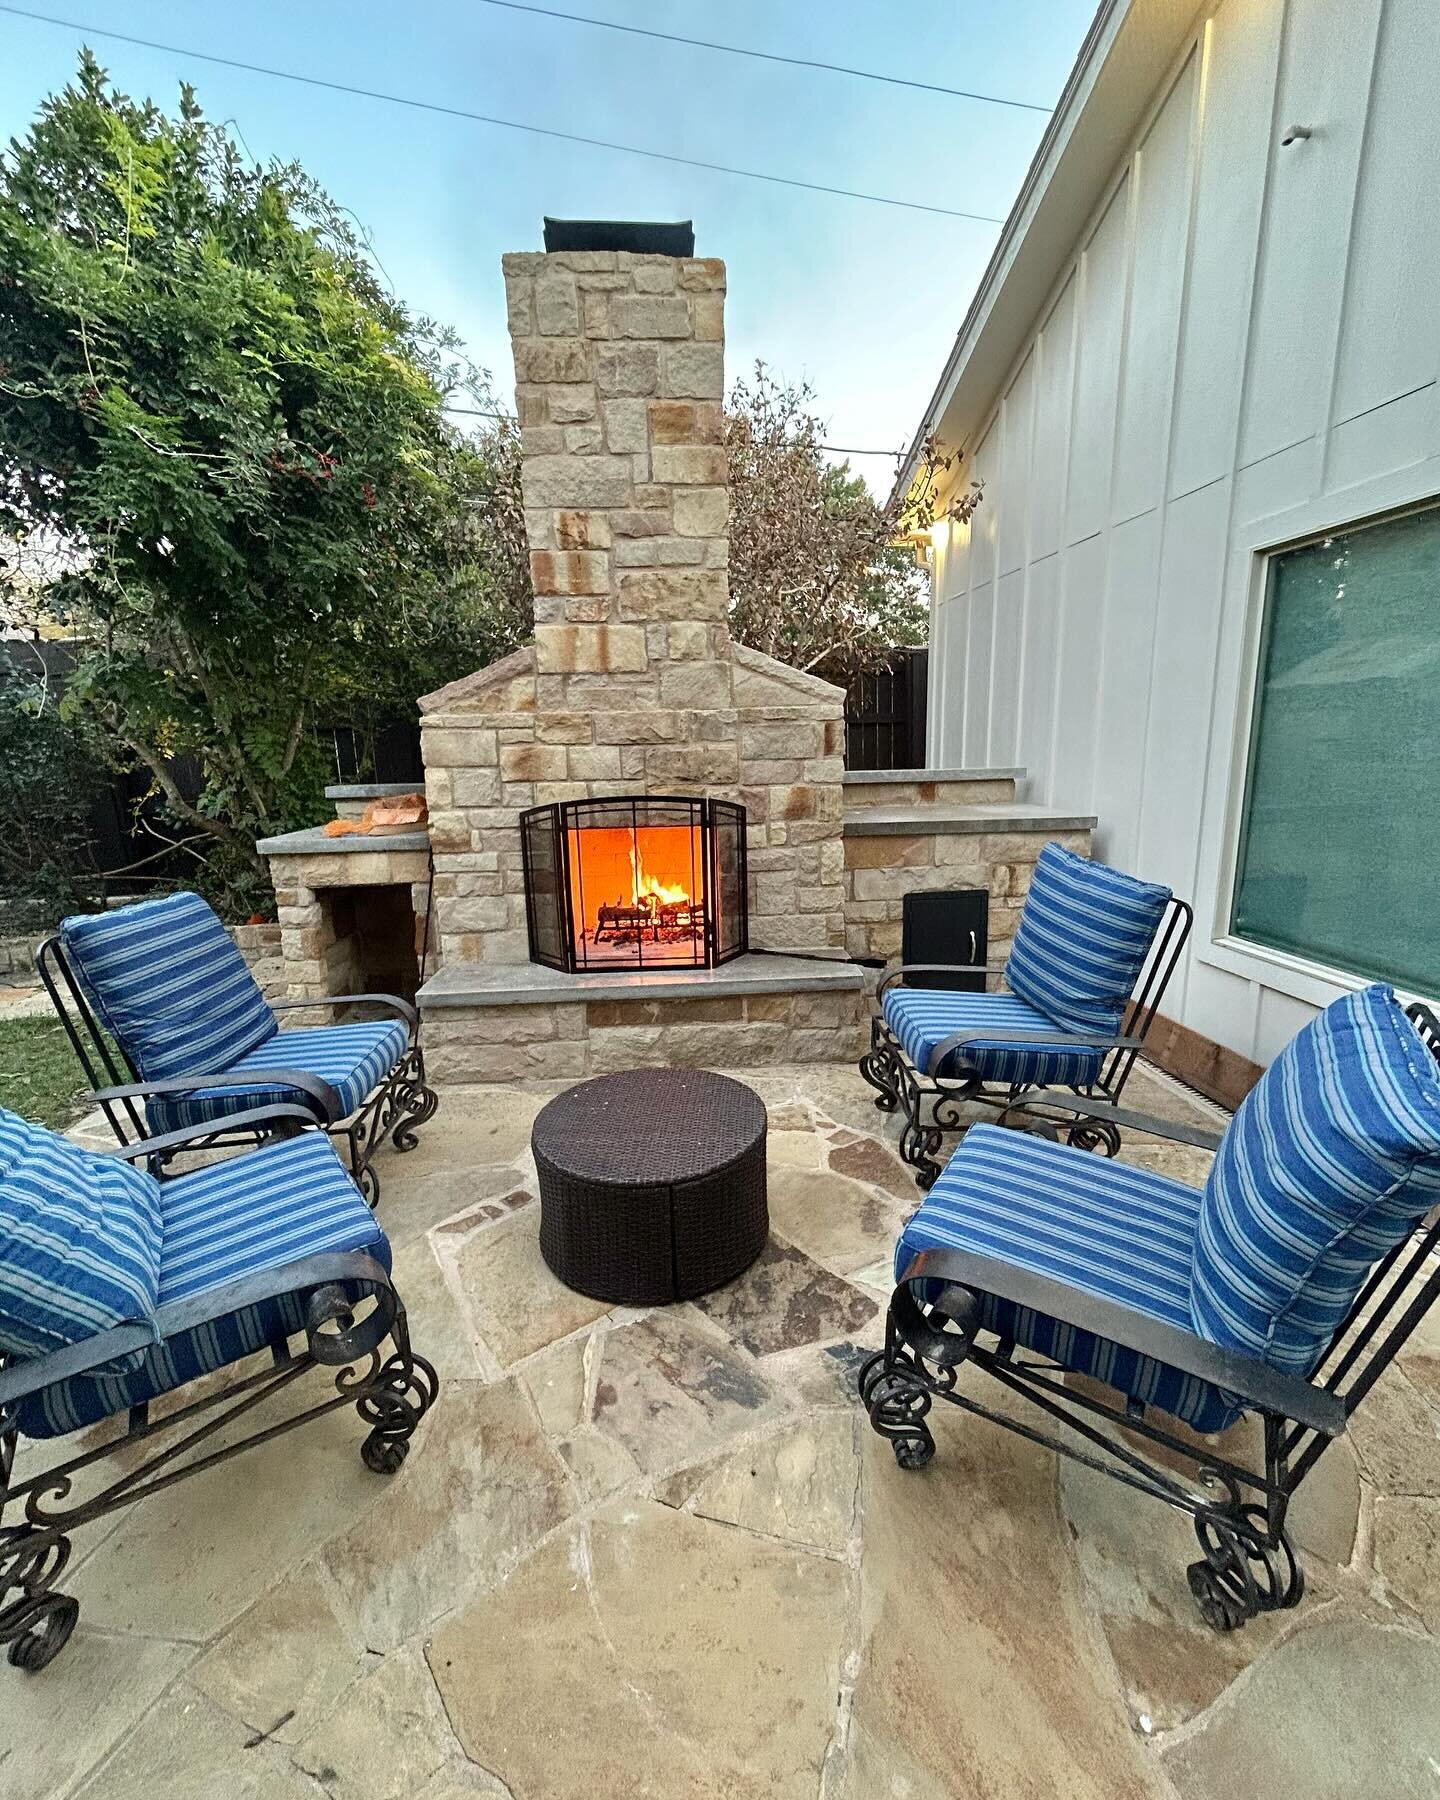 Ready for the cold  season?  Let us help you out with that&hellip;  #fireplace #custommasomry #tangelstucco&amp;masomry